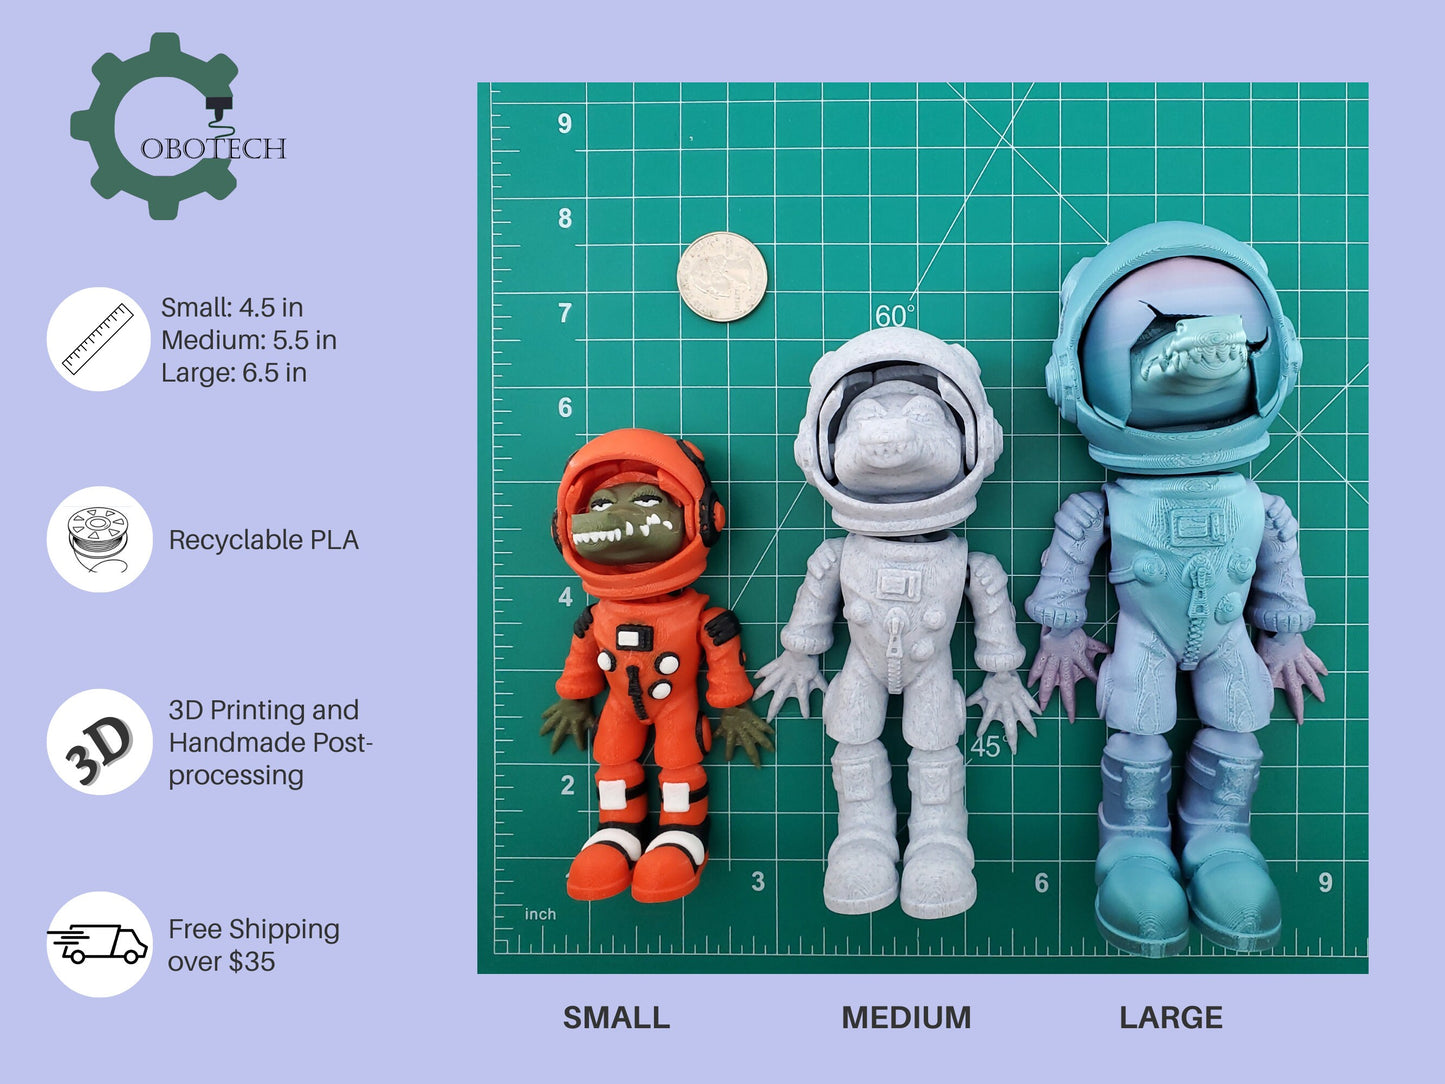 3D Print Articulated Gator Astronaut by Cobotech, Articulated Toys, Desk Decor, Cool Gift